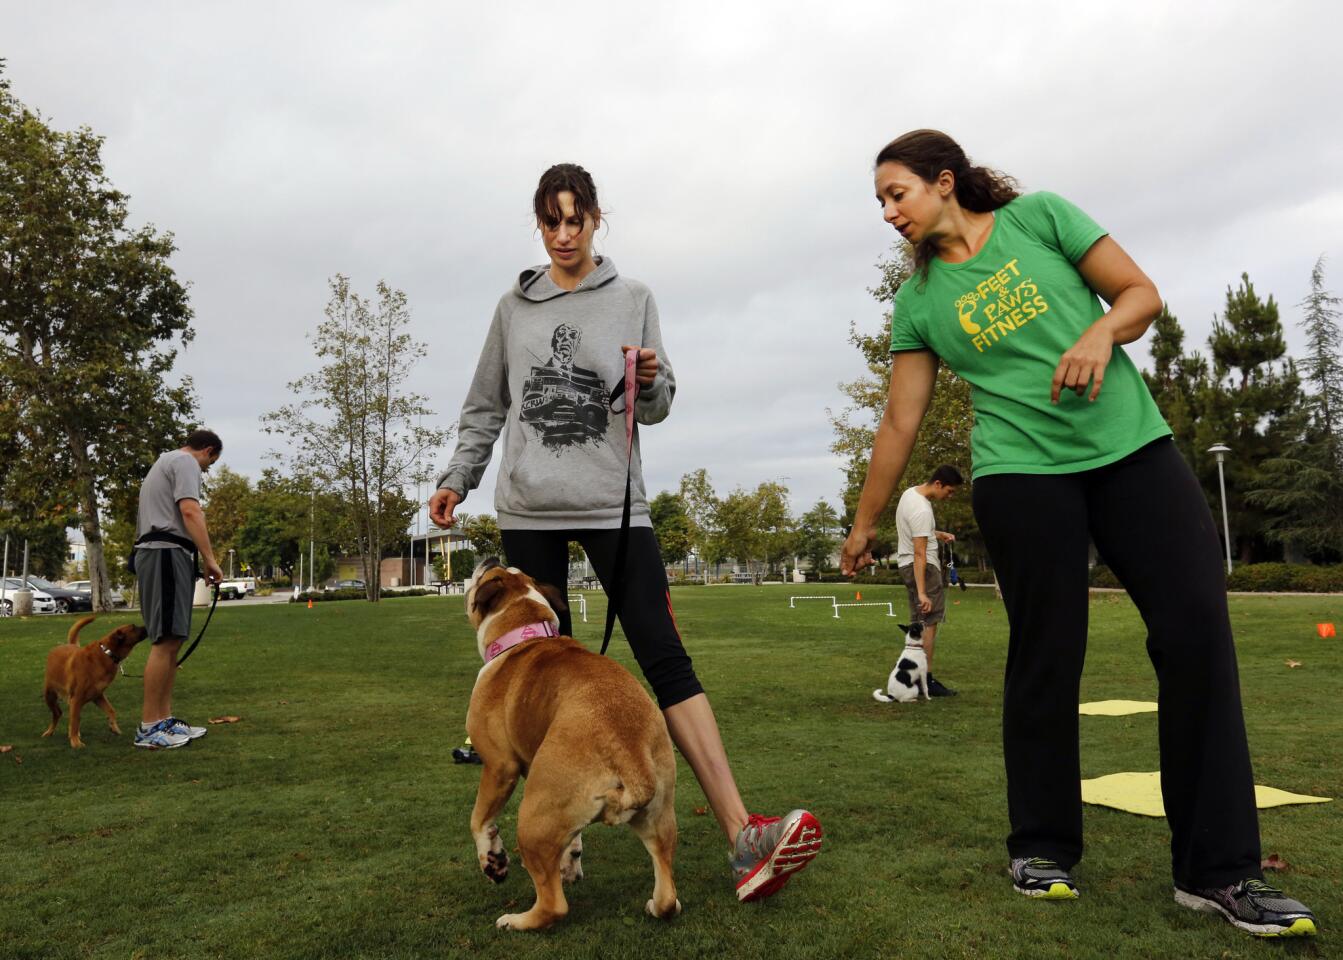 Feet & Paws Fitness instructor Tracy James gives a few training tips to student Sharle Kochman and pup Gordita.